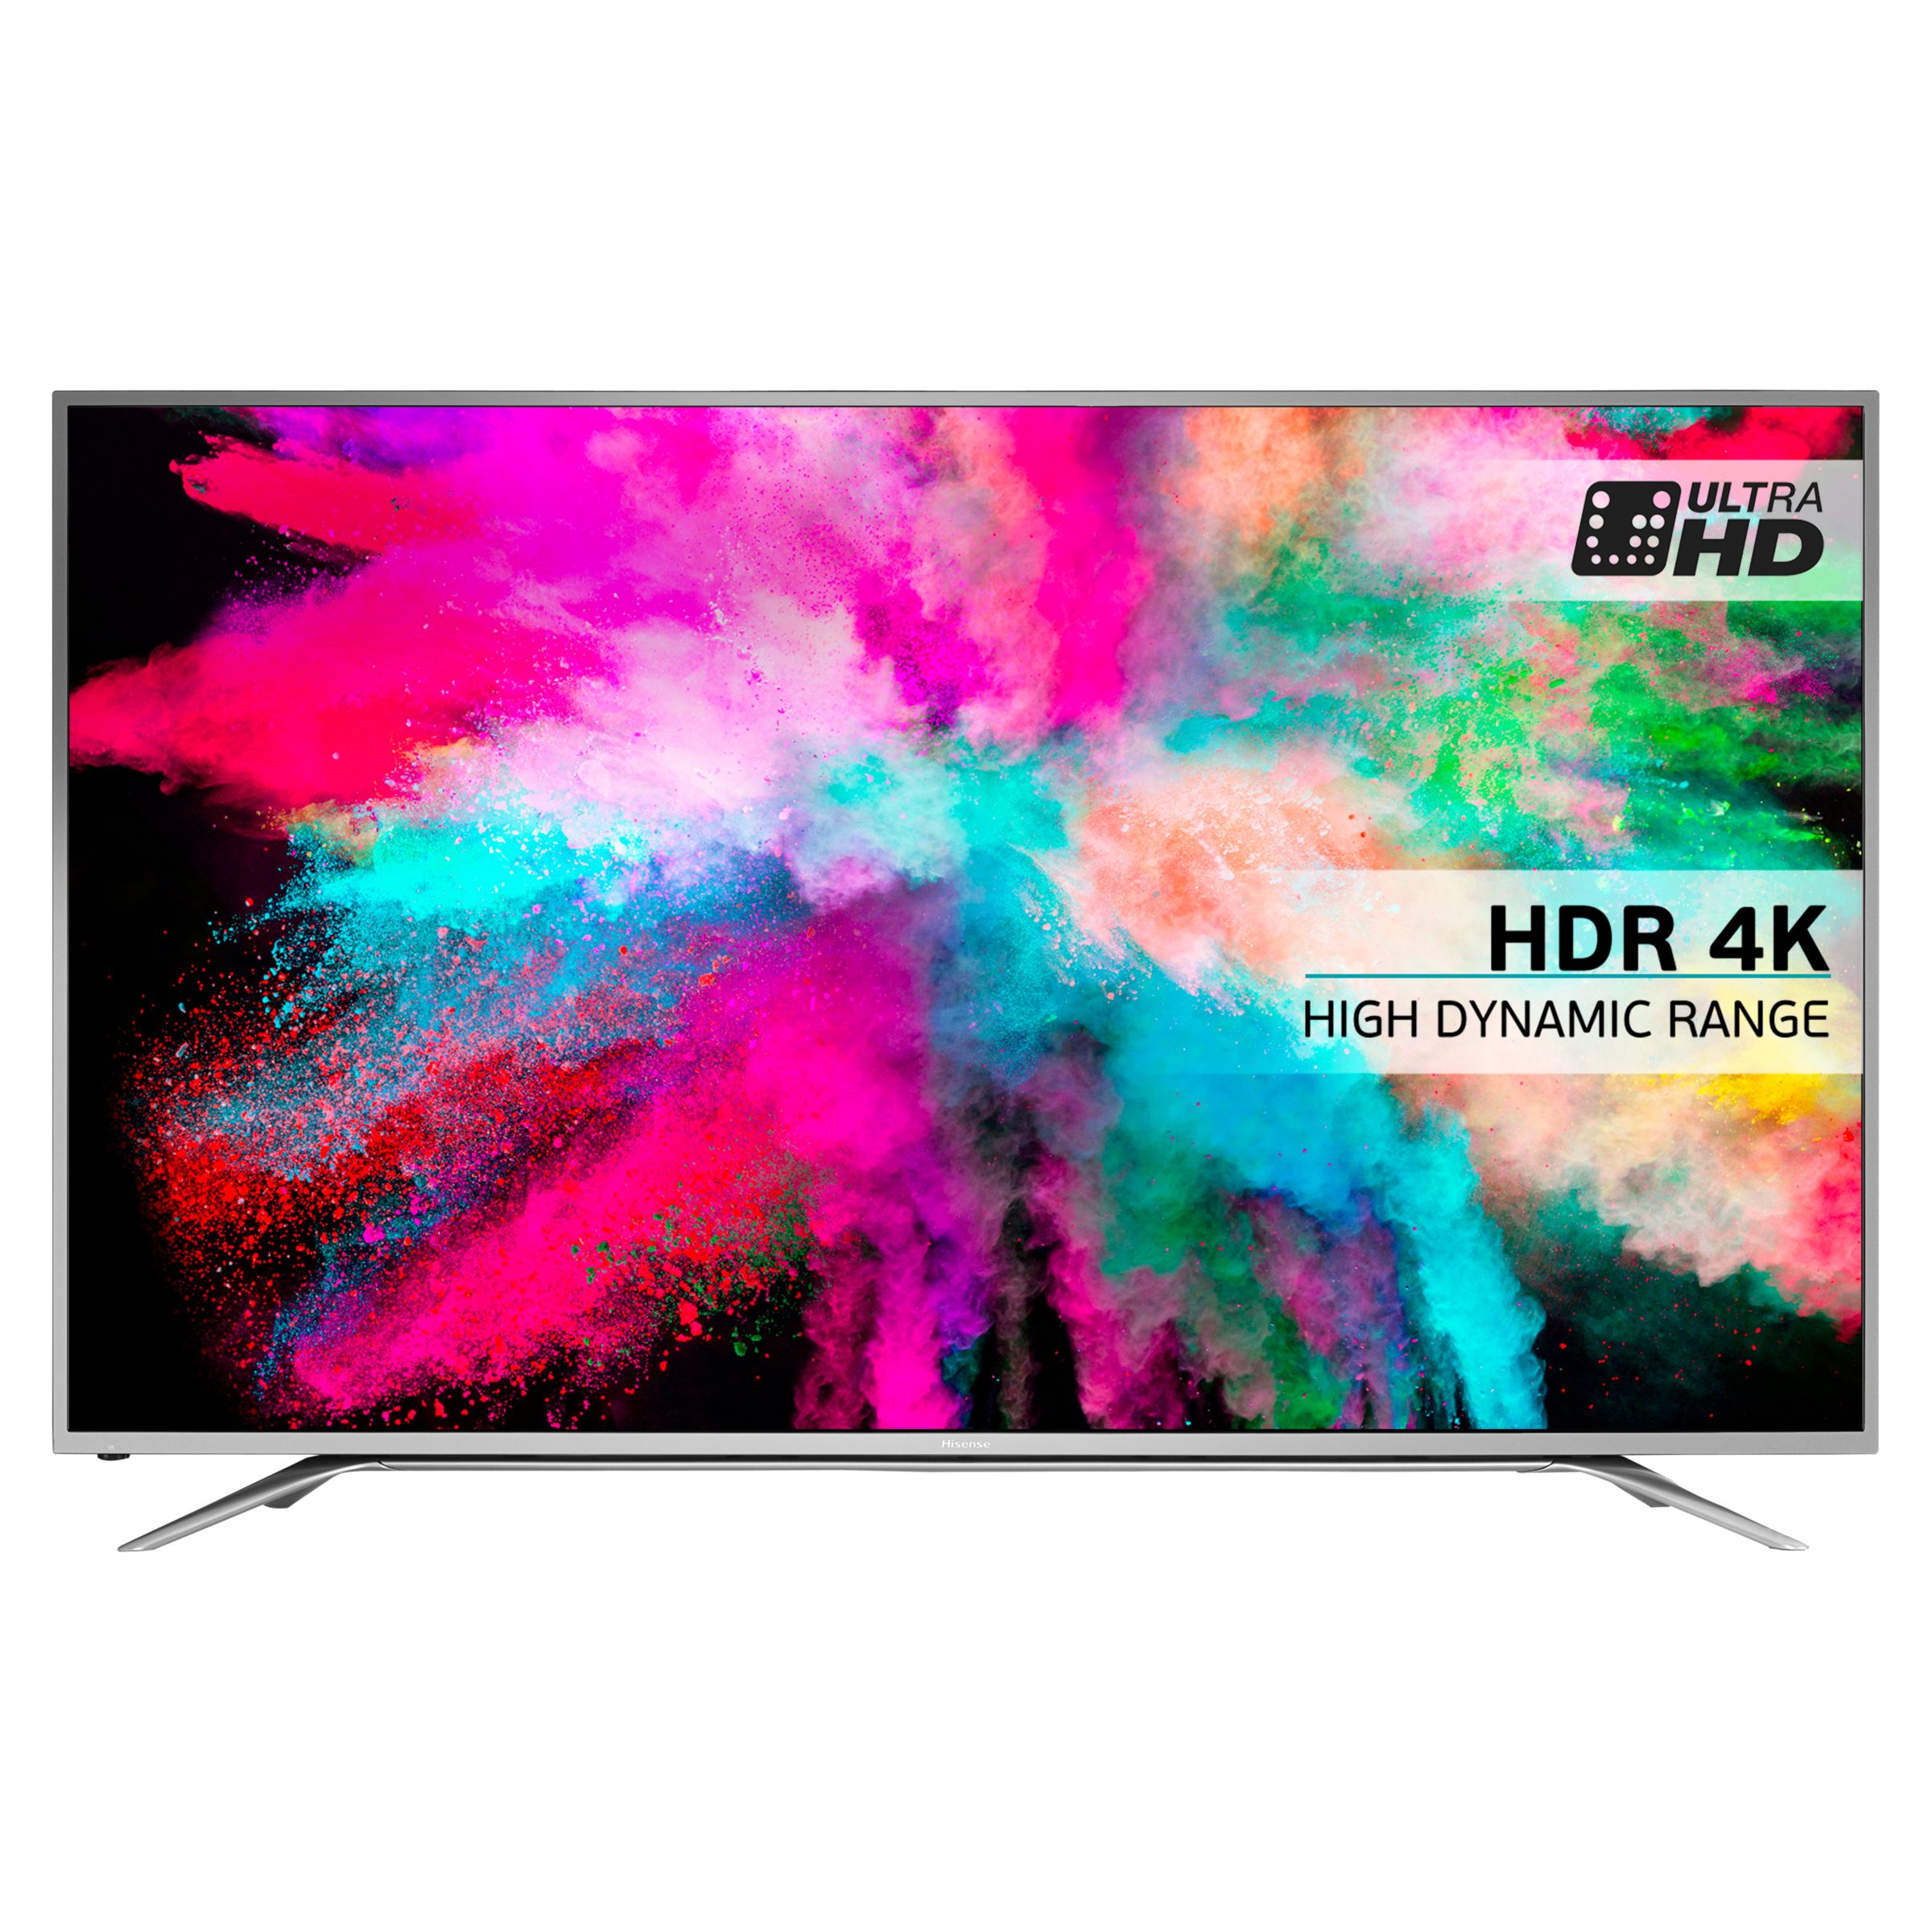 Hisense 65M5500 LED HDR 4K Ultra HD Smart TV, 65" With Freeview HD & Anyview Cast, Silver